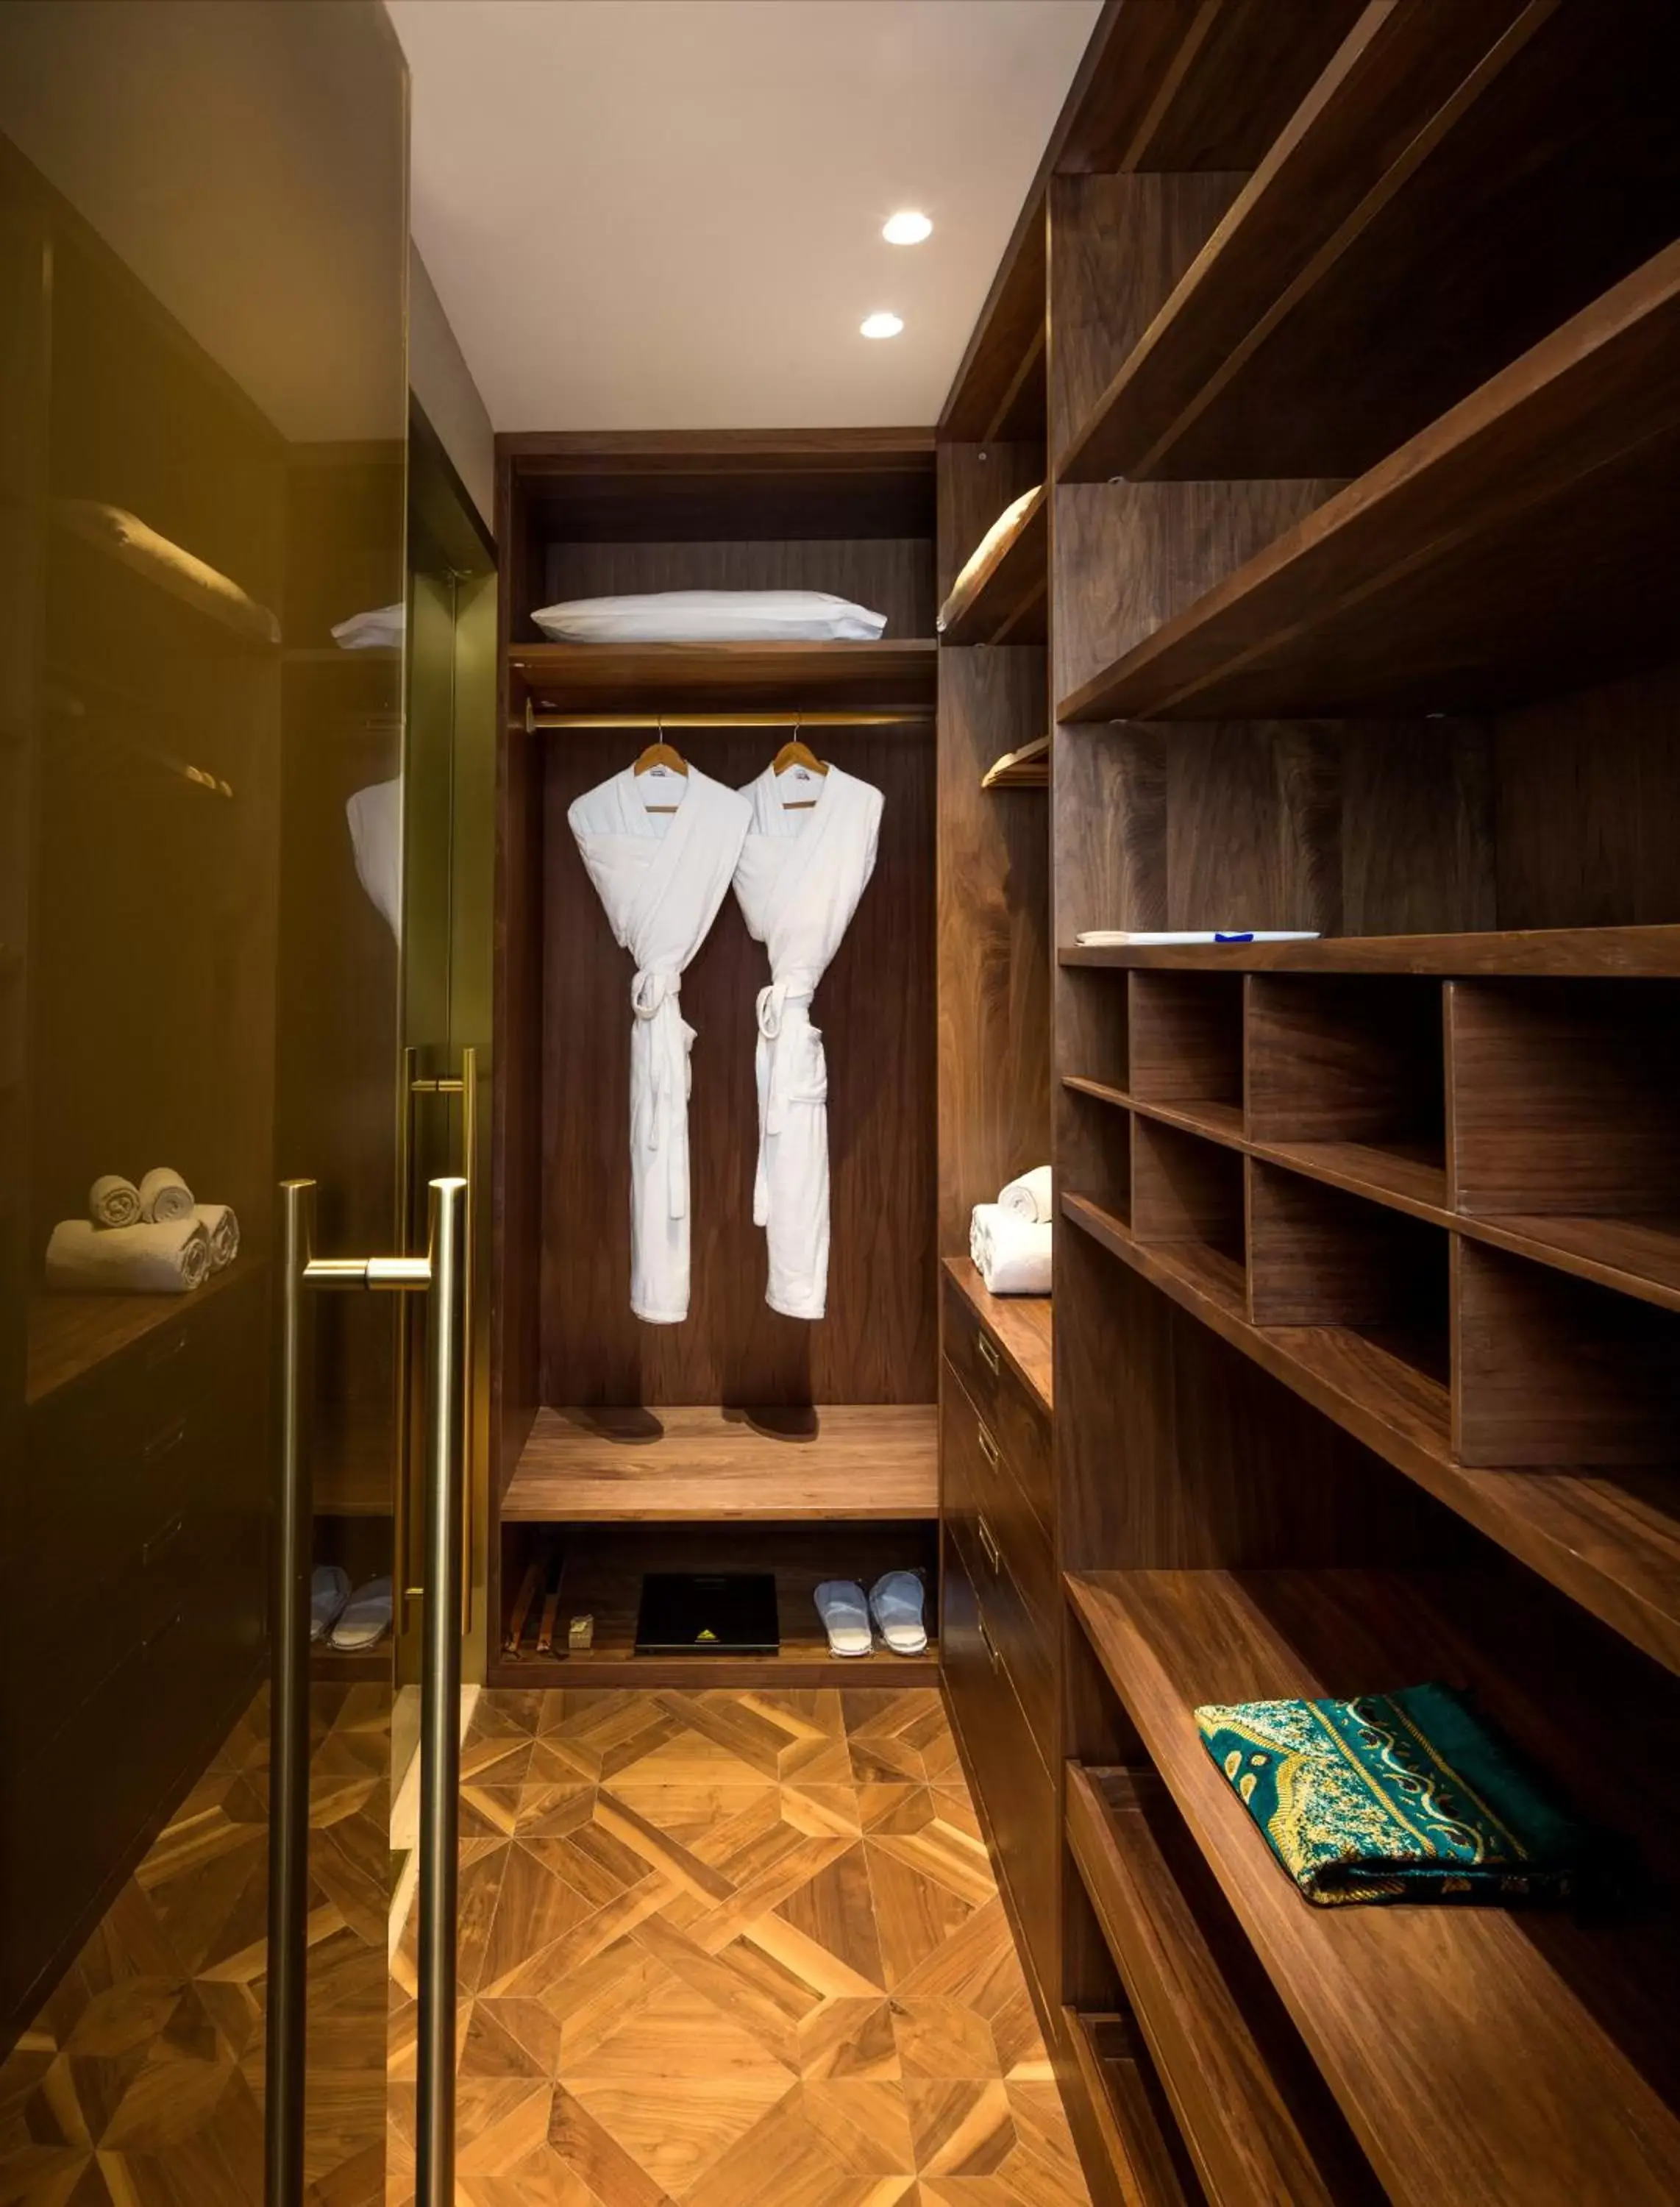 wardrobe in Millennium Place Barsha Heights Hotel Apartments